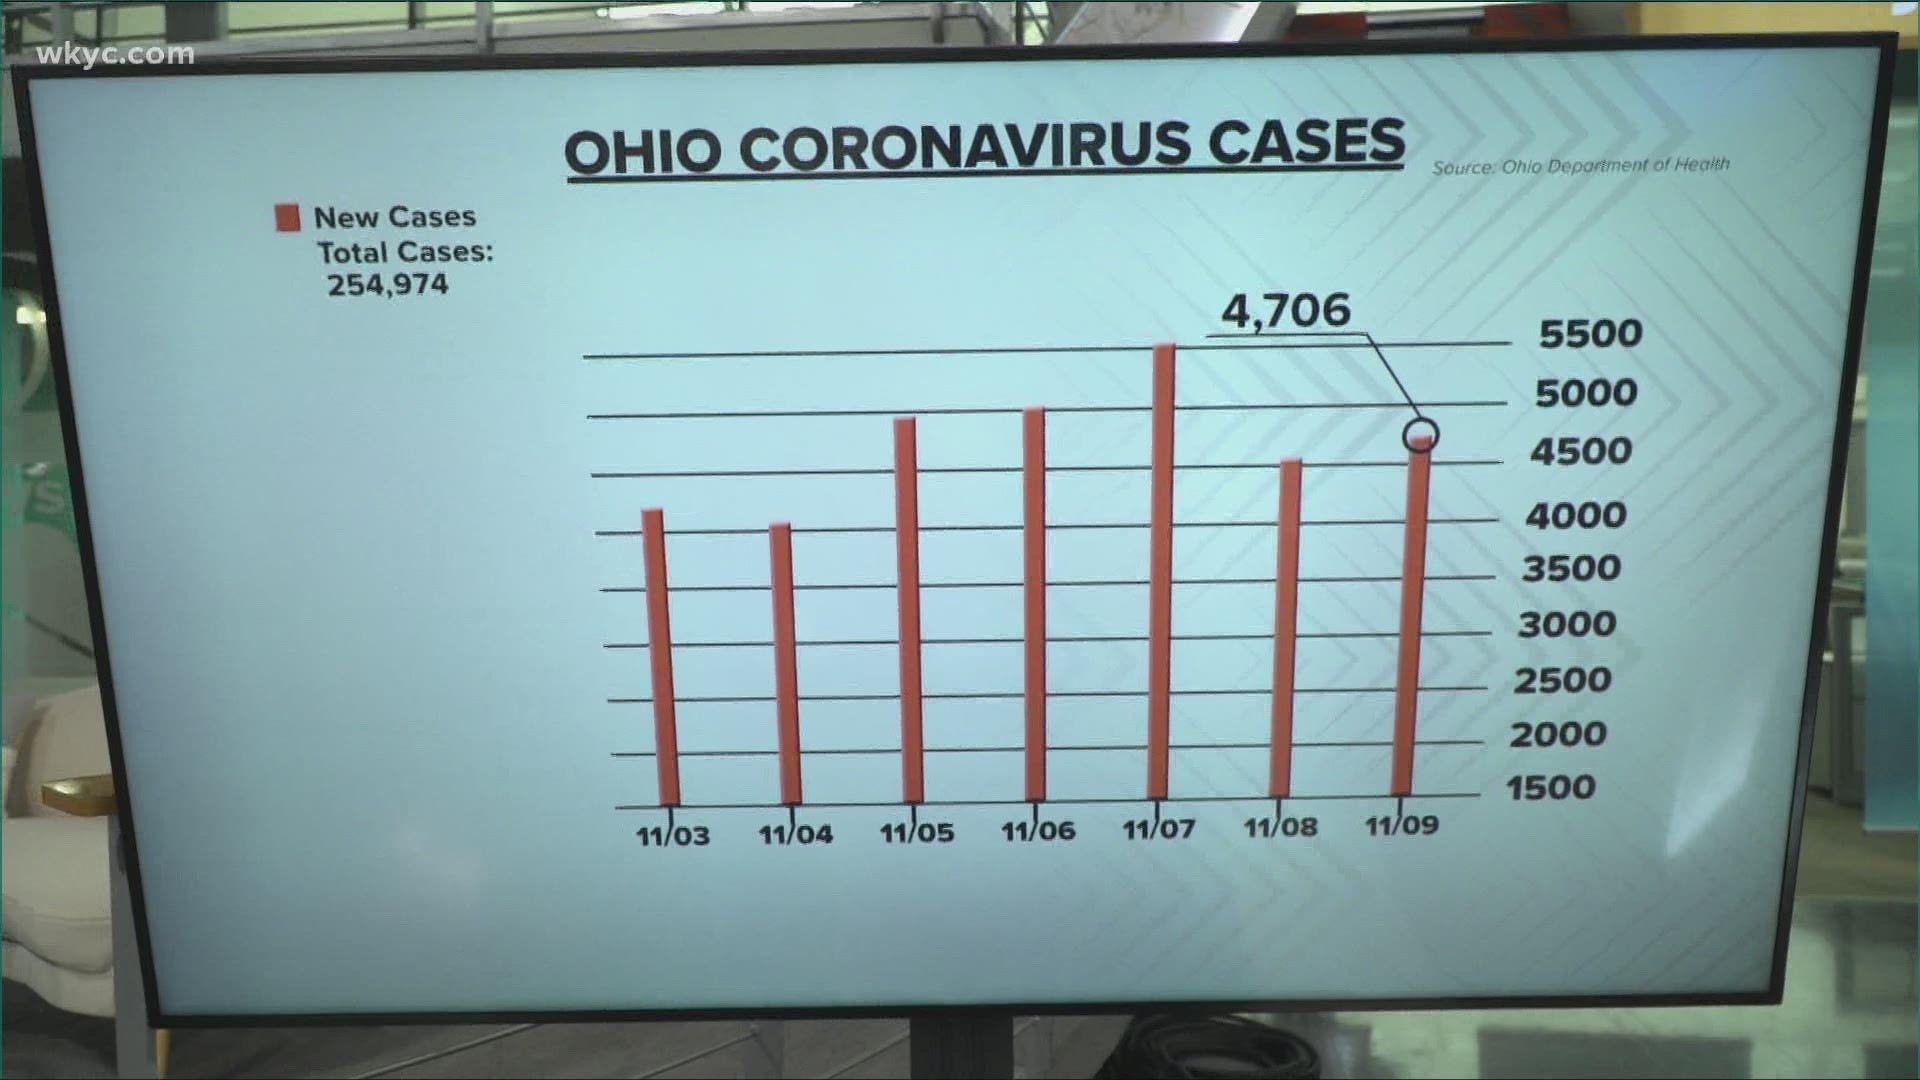 Ohio Department of Health is reporting 4,706 new cases of COVID-19.  Unfortunately, there was also 7 deaths reported in Ohio.